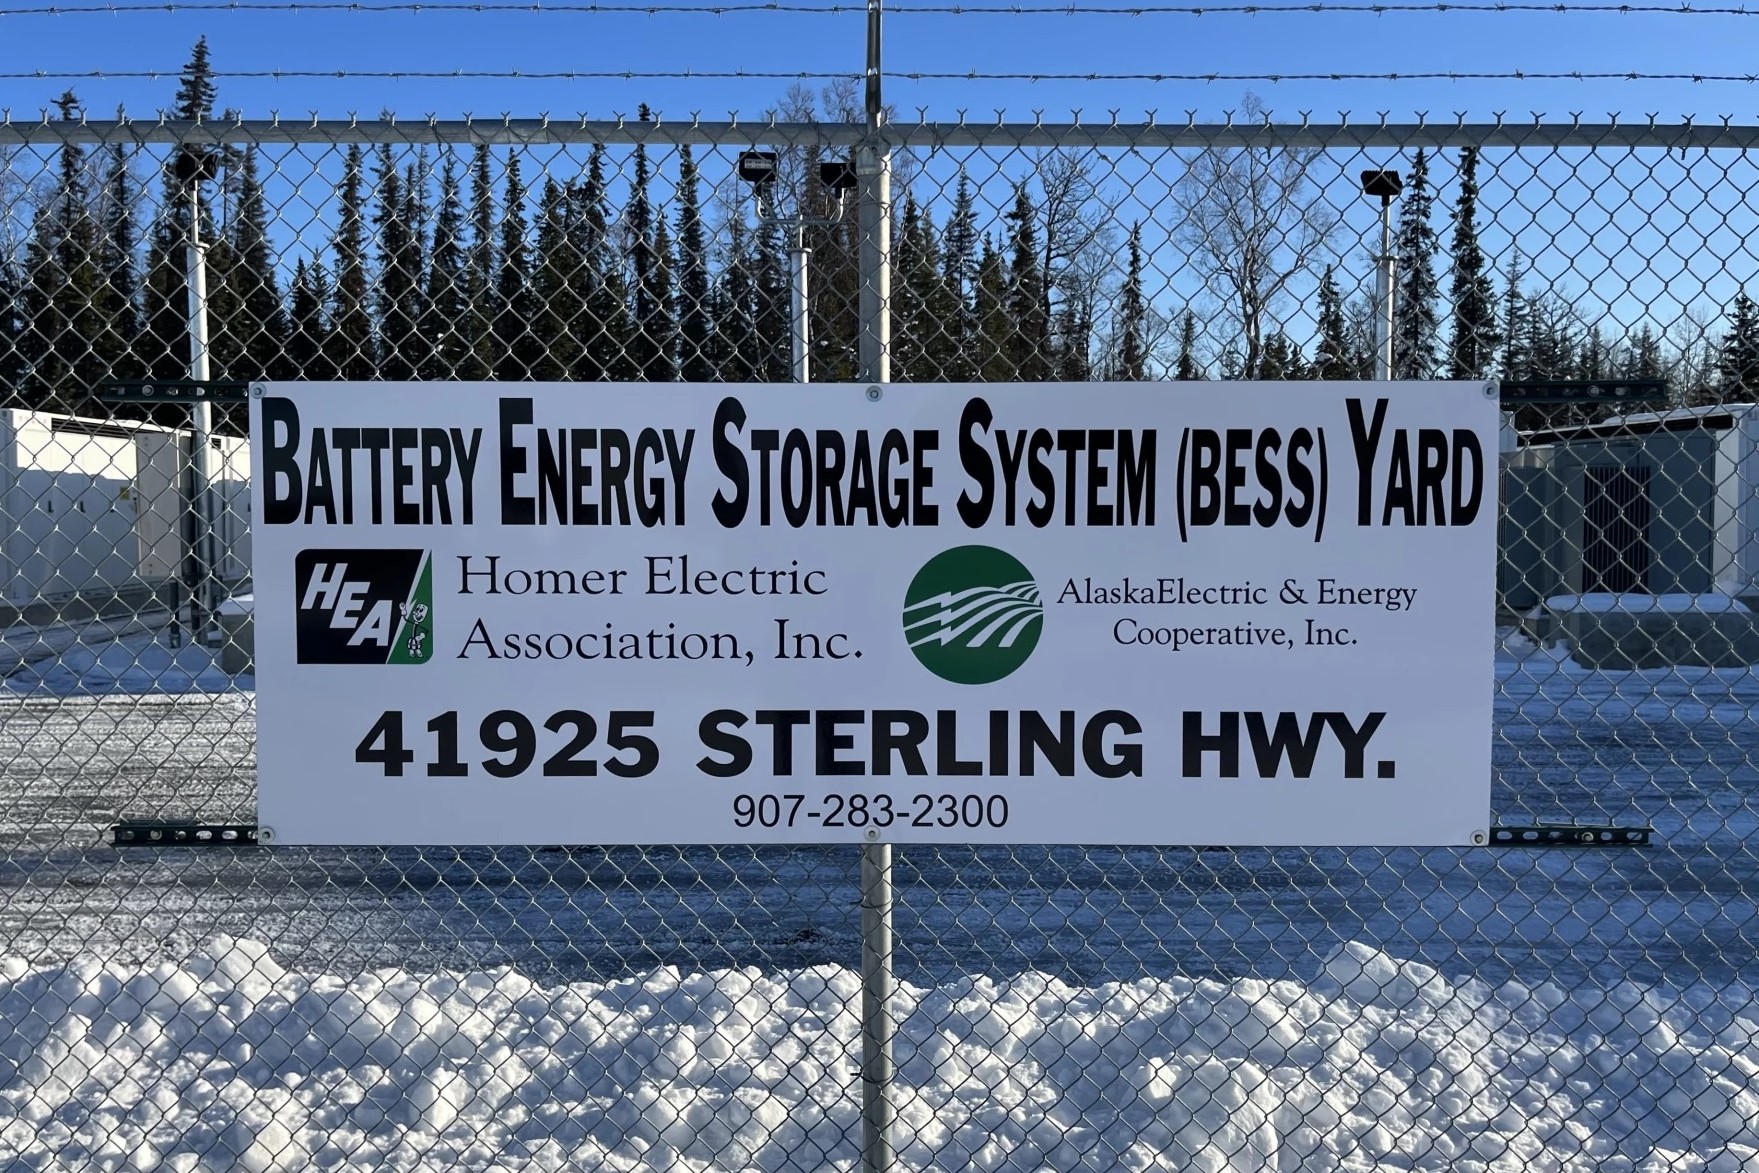 a battery energy storage system